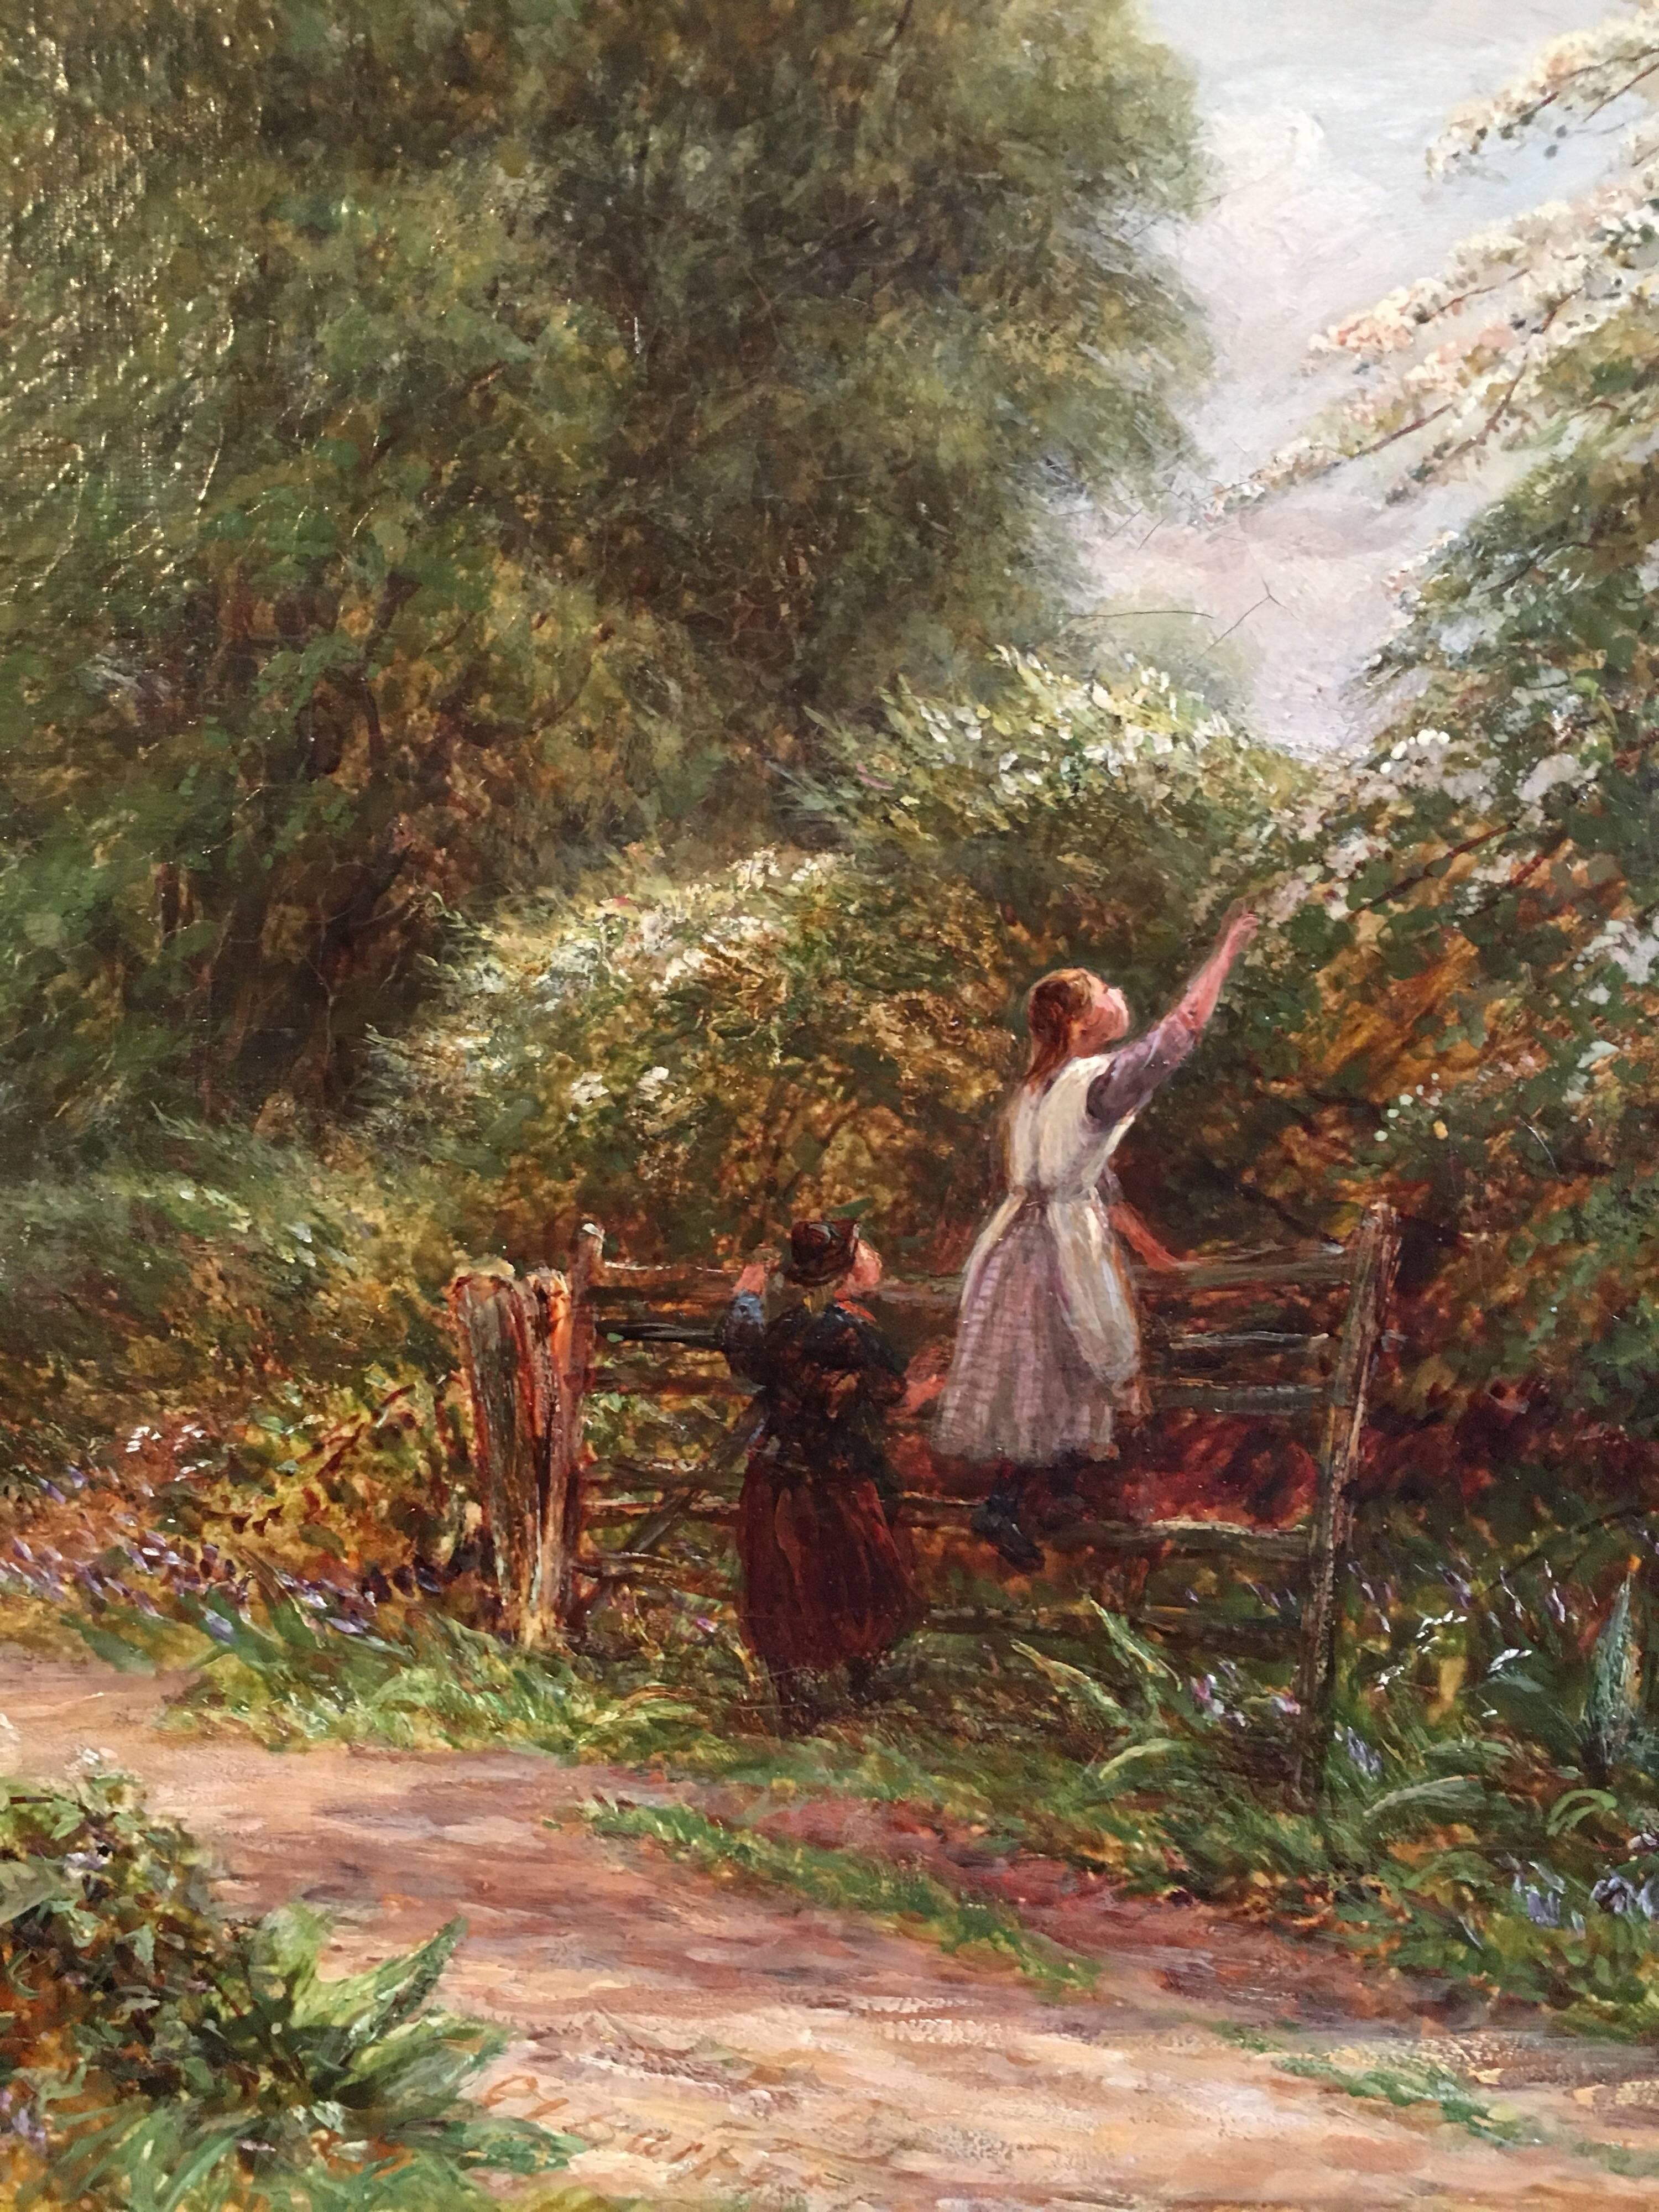 Gathering Berries, Victorian Oil Painting, Signed
English School, 19th Century
Oil painting on canvas, framed
Signed indistinctly at the bottom of the painting on the left
Framed size: 18.5 x 26 inches

Traditional Victorian landscape scene